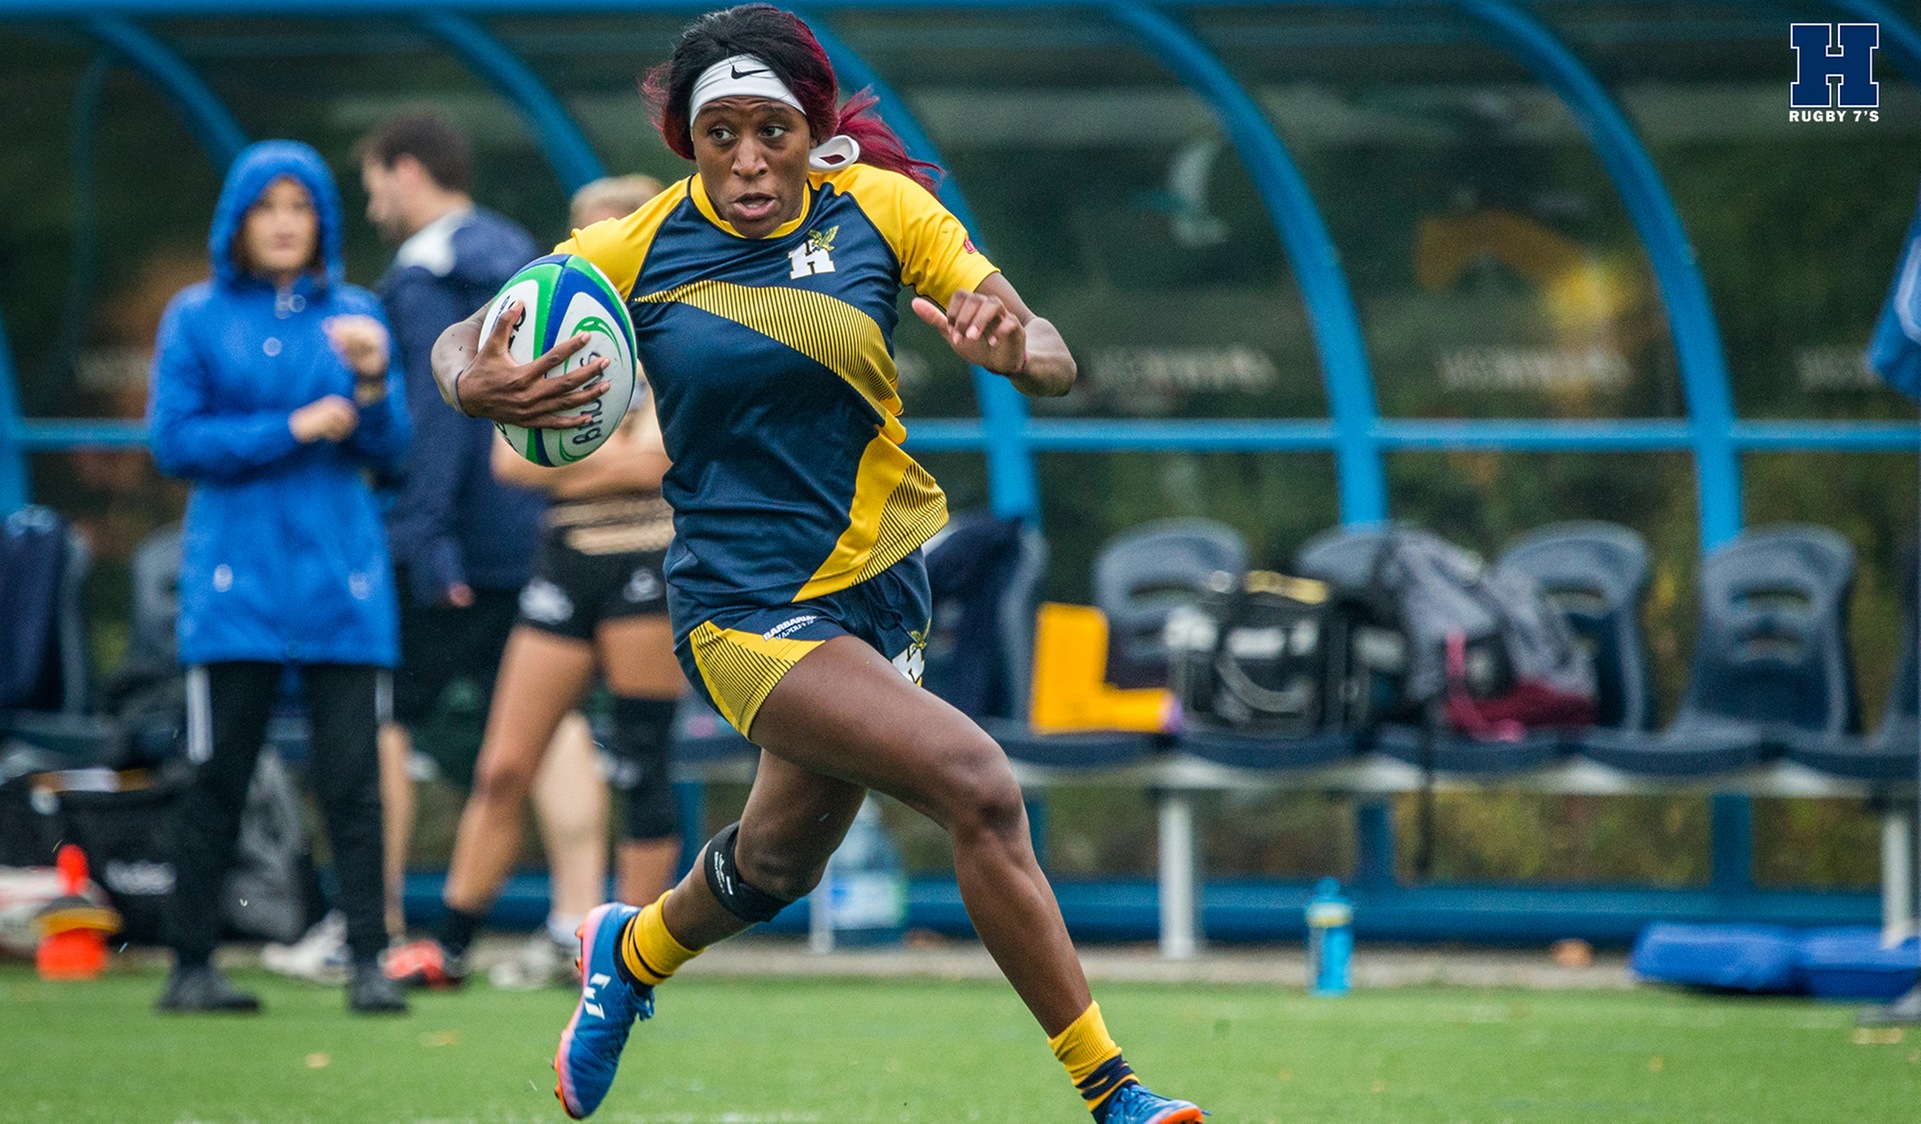 Rugby 7's Finishes East/West With 3-1 Record, Branch Sets New OCAA Single-Game Record